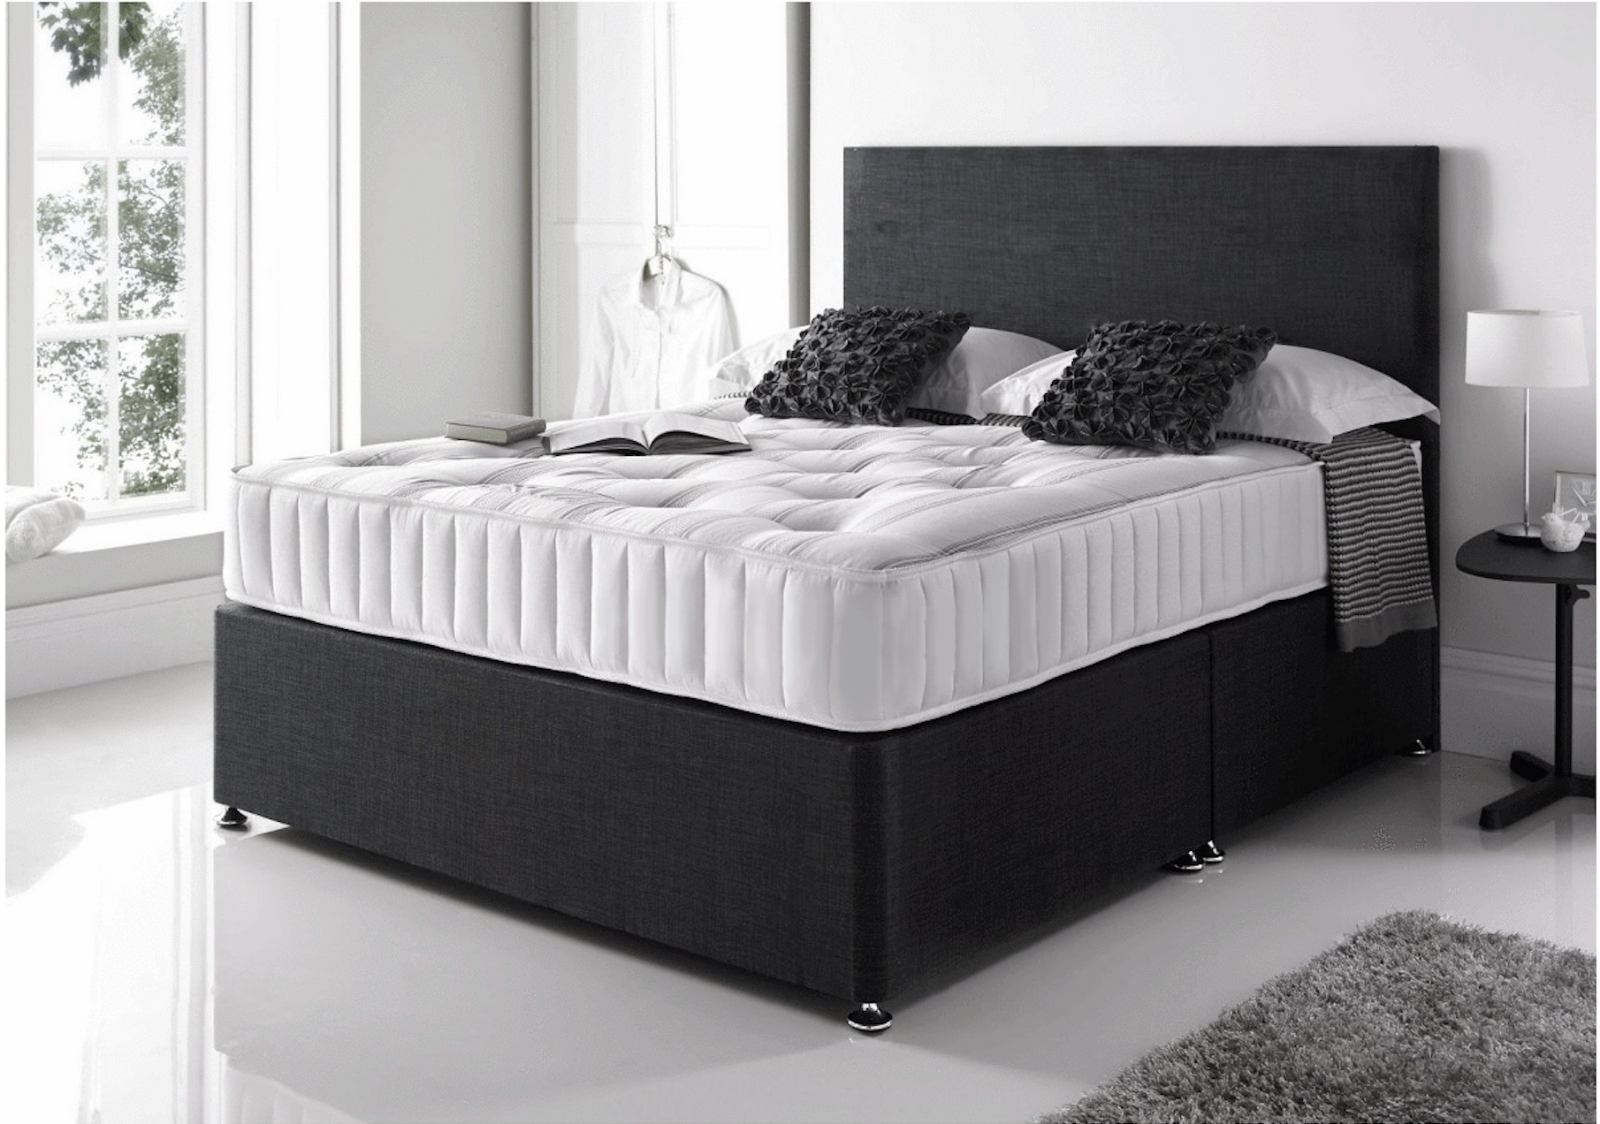 bed and mattress co uk